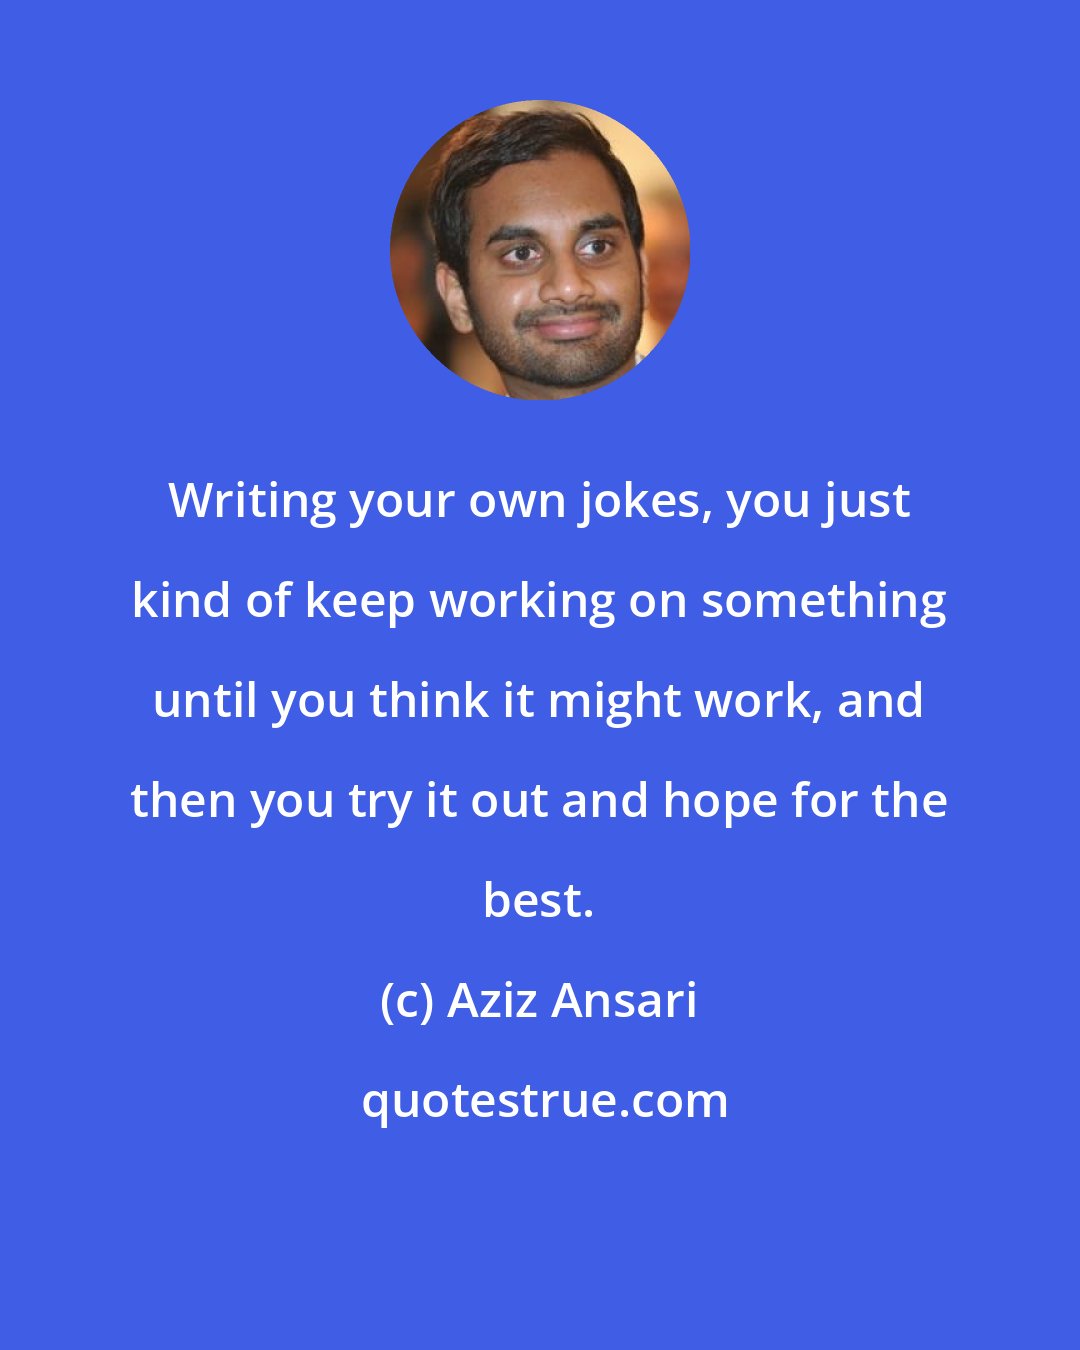 Aziz Ansari: Writing your own jokes, you just kind of keep working on something until you think it might work, and then you try it out and hope for the best.